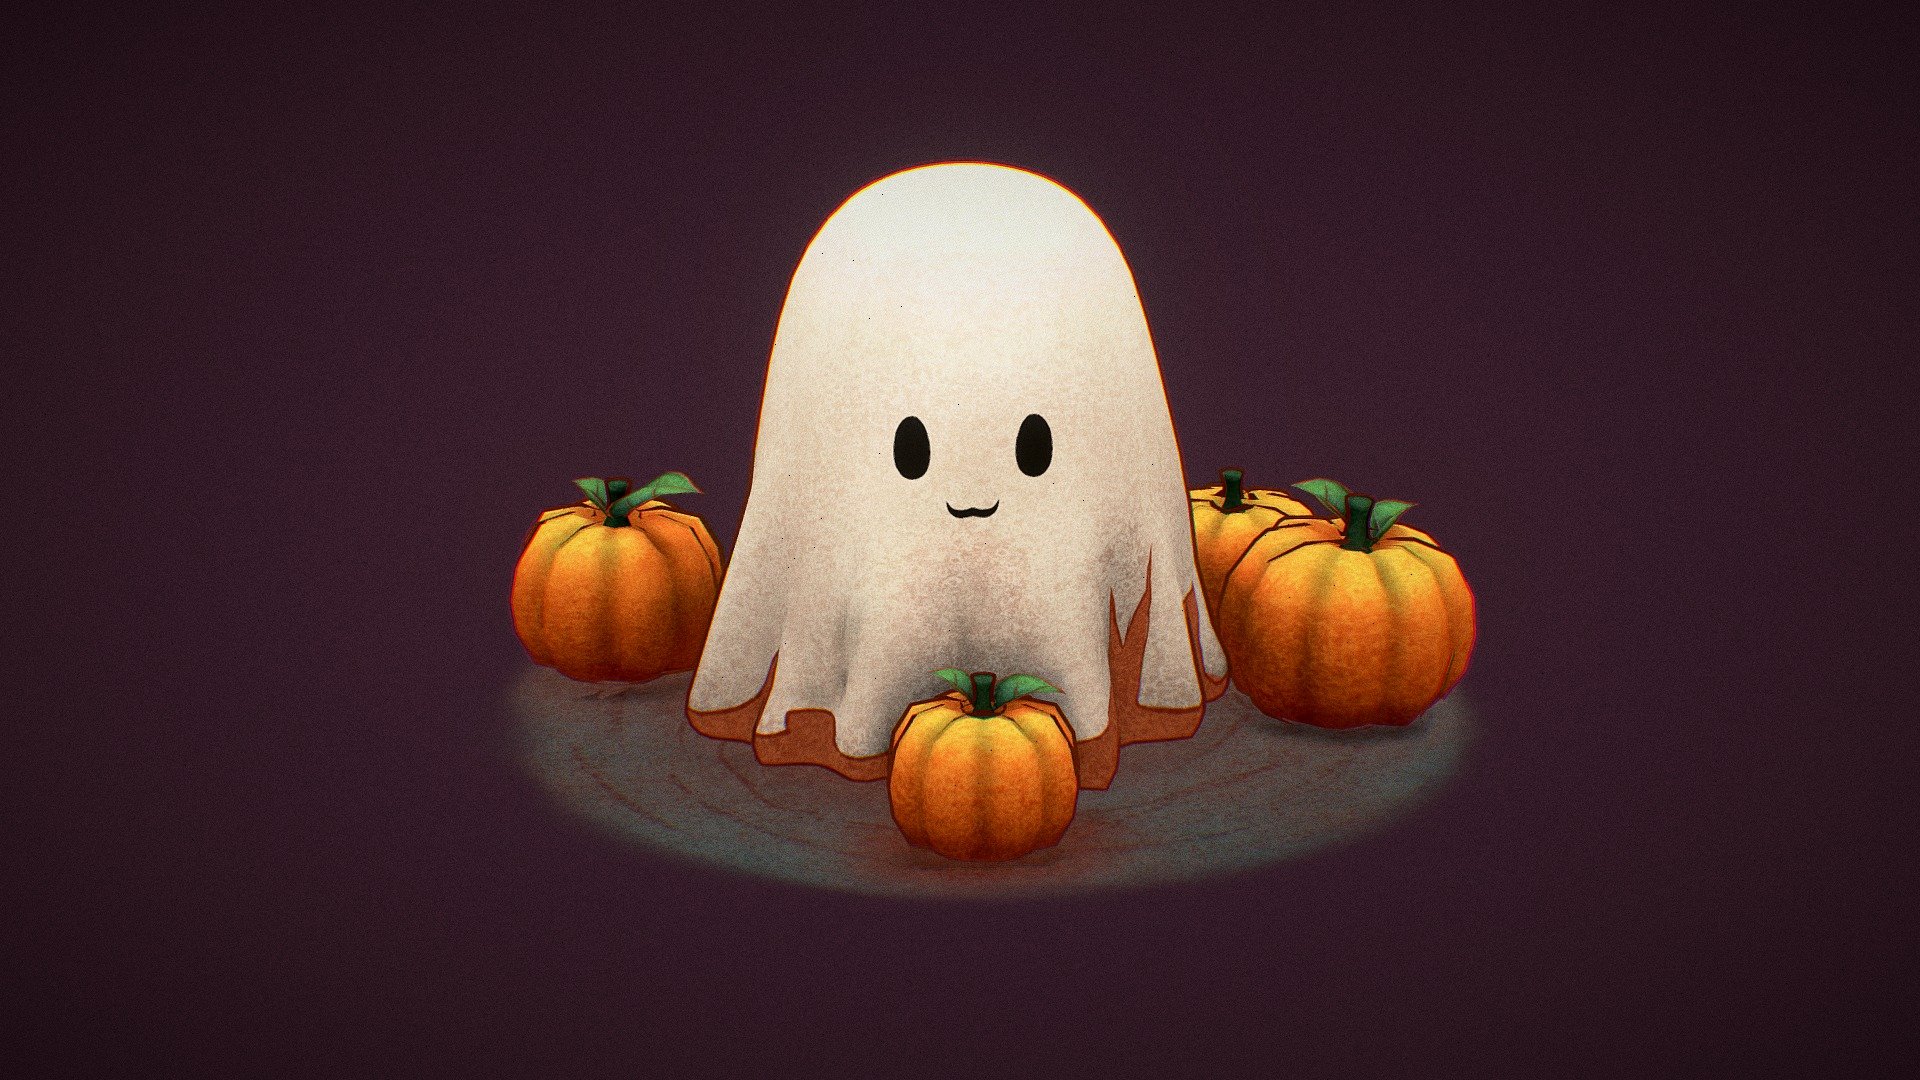 So here's a new stylized character model. This time I wanted to make something quick for the spooky season. I tried some new details on my own style. Not super happy with the result, but still funny to make. Hope you people like it.

Available for downloading. Made using Blender for modelling and Substance Painter for texturing (hand painted textures). Happy halloween everyone! :)


Blender #MadeWithBlender #BlenderNation - Cute ghost - Download Free 3D model by P3D (@PelpesElSabio) 3d model